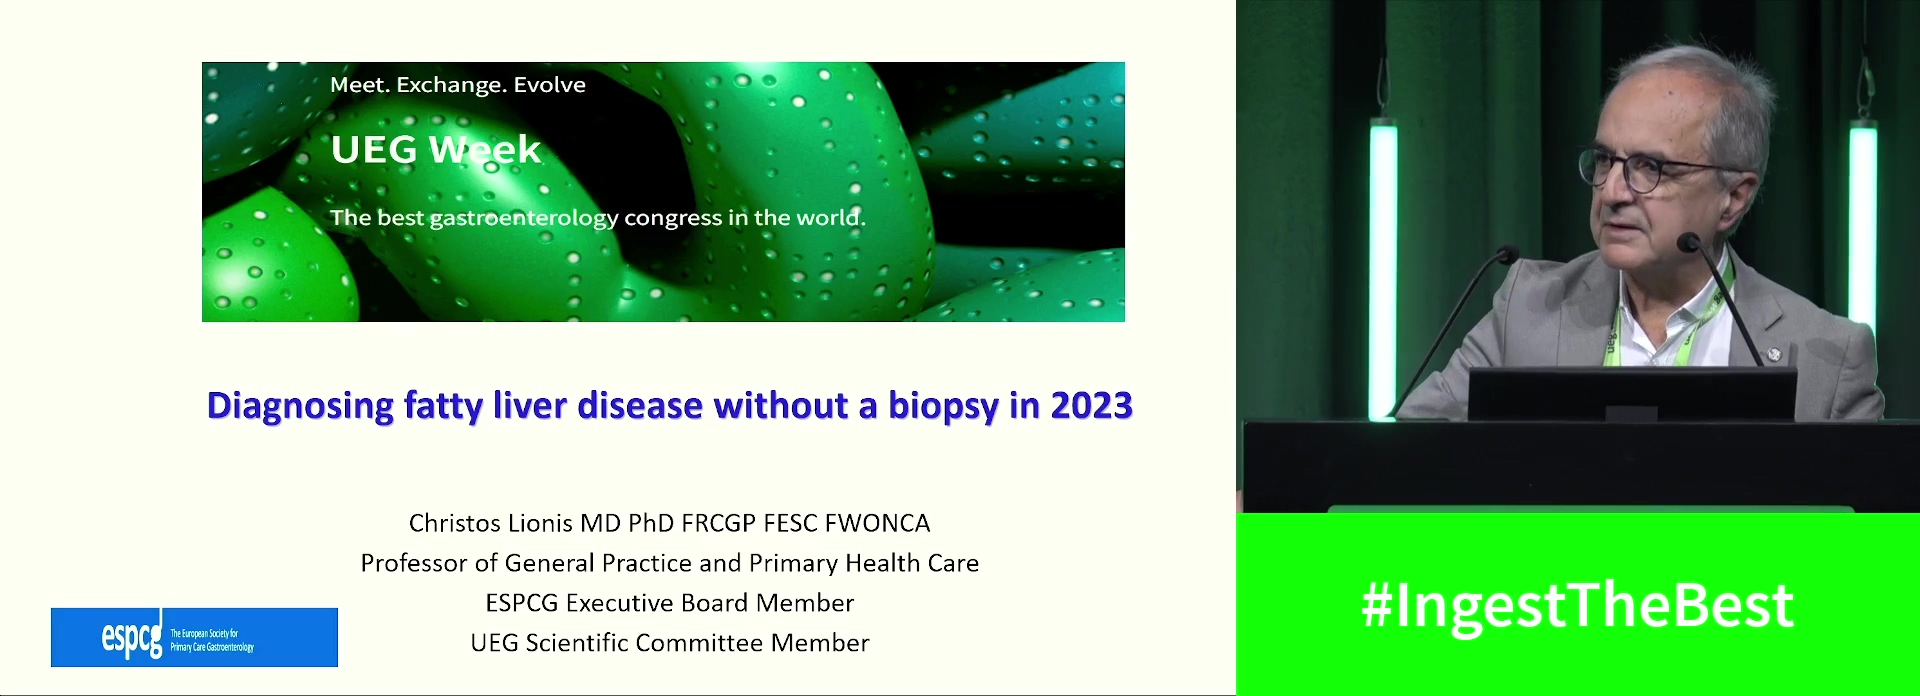 Diagnosing fatty liver disease without a biopsy in 2023